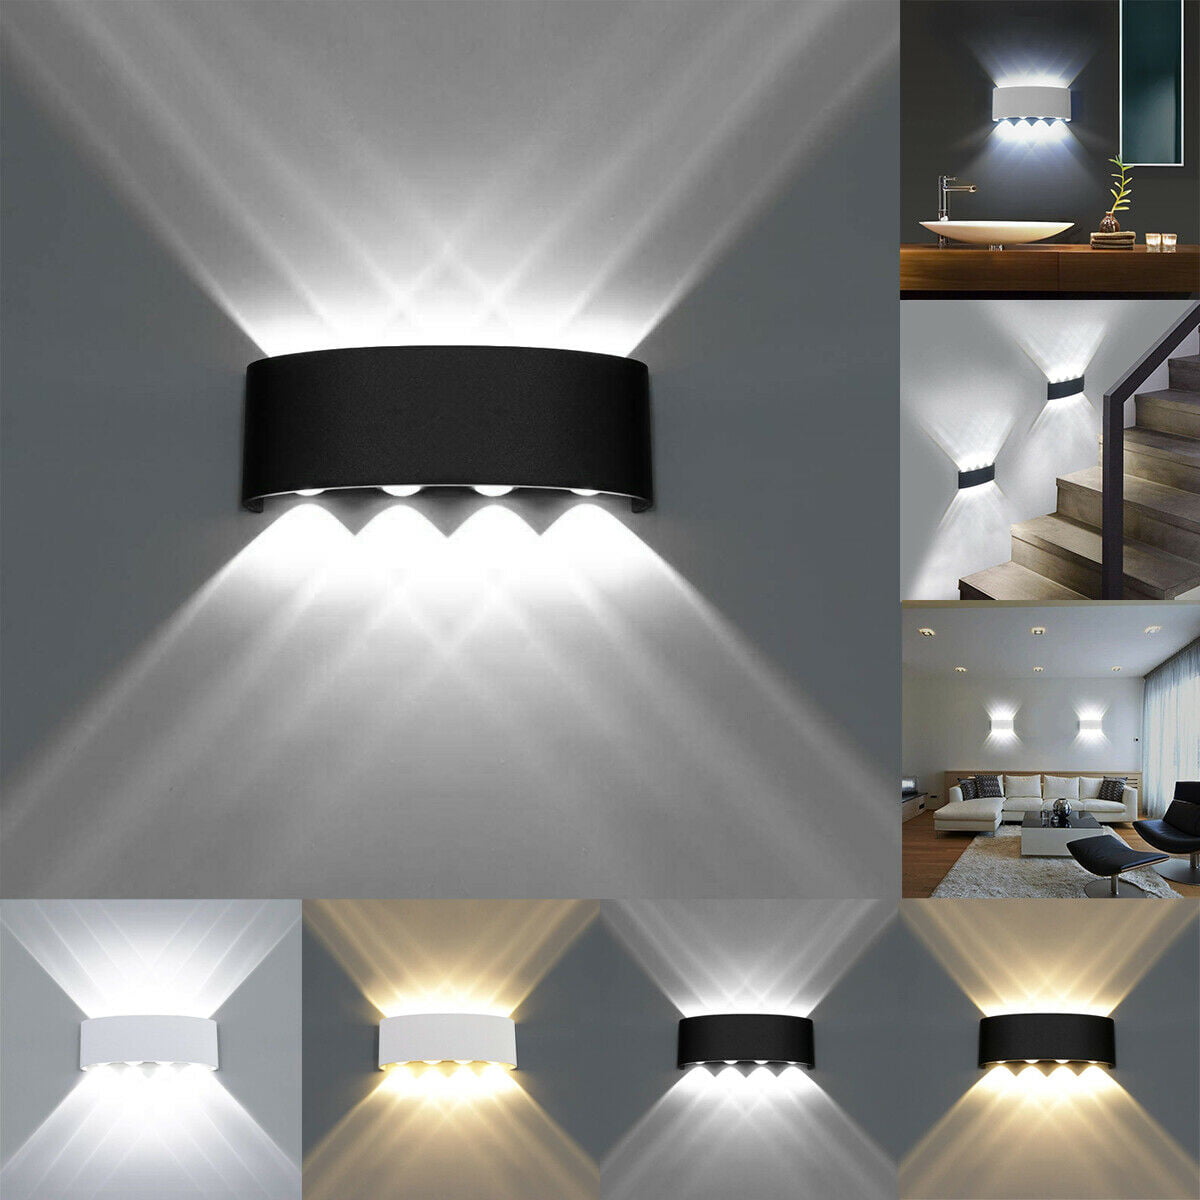 LED Wall Lights Modern Up Down Sconce Lighting Fixture Lamp Indoor Outdoor 6W/8W 